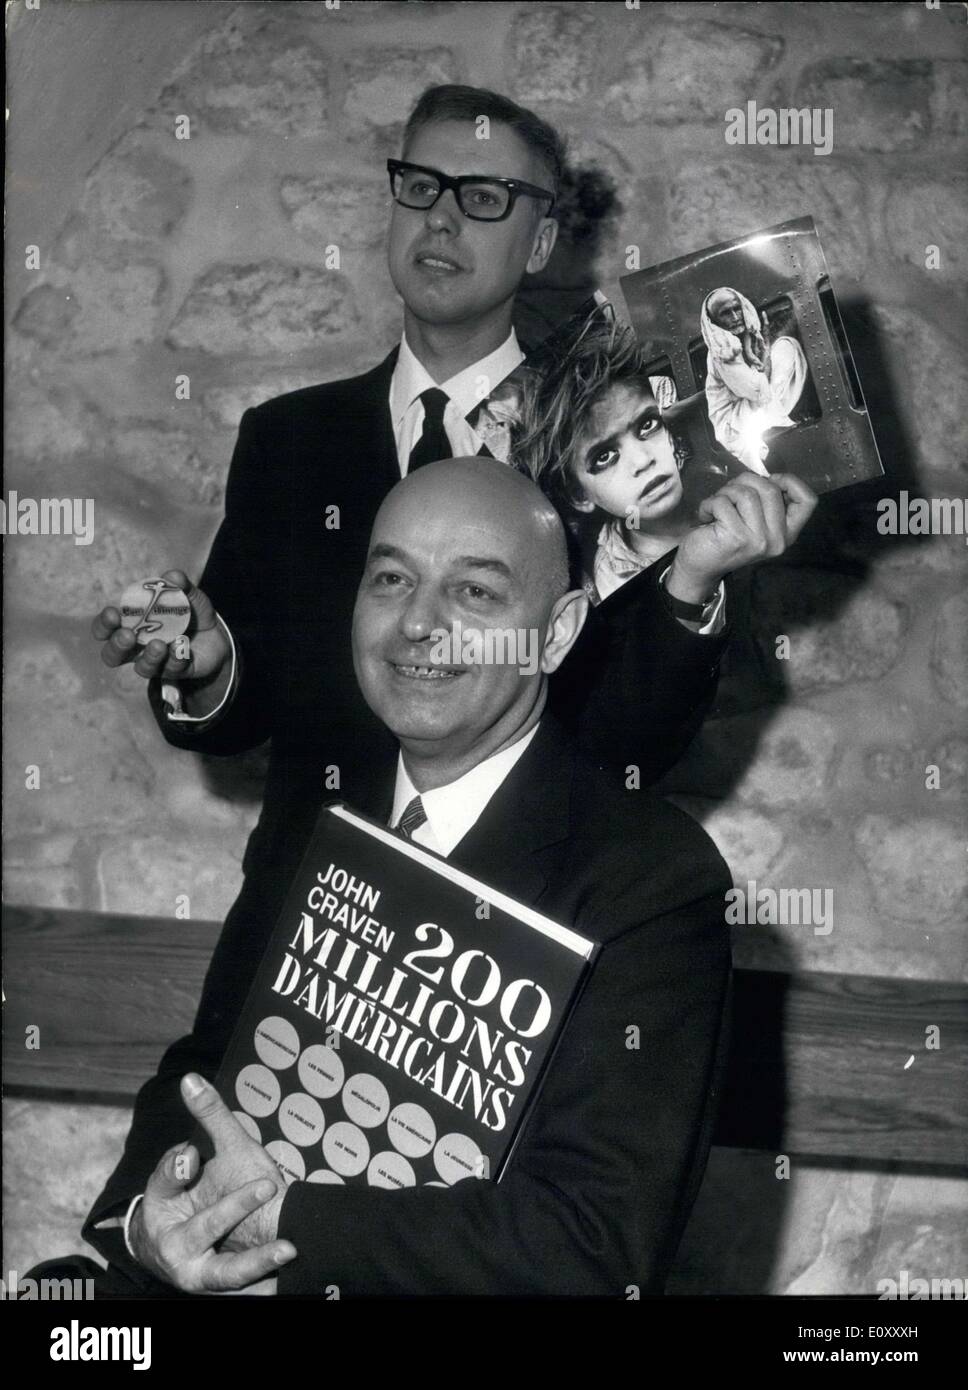 Mar. 28, 1968 - Journalist Claude Sauvageot won the Niepce Prize for his collection of photos that he took in India. John Craven won the Nadar Prize for his book ''200 Million Americans''. The two men are posing with their award-winning work. Stock Photo